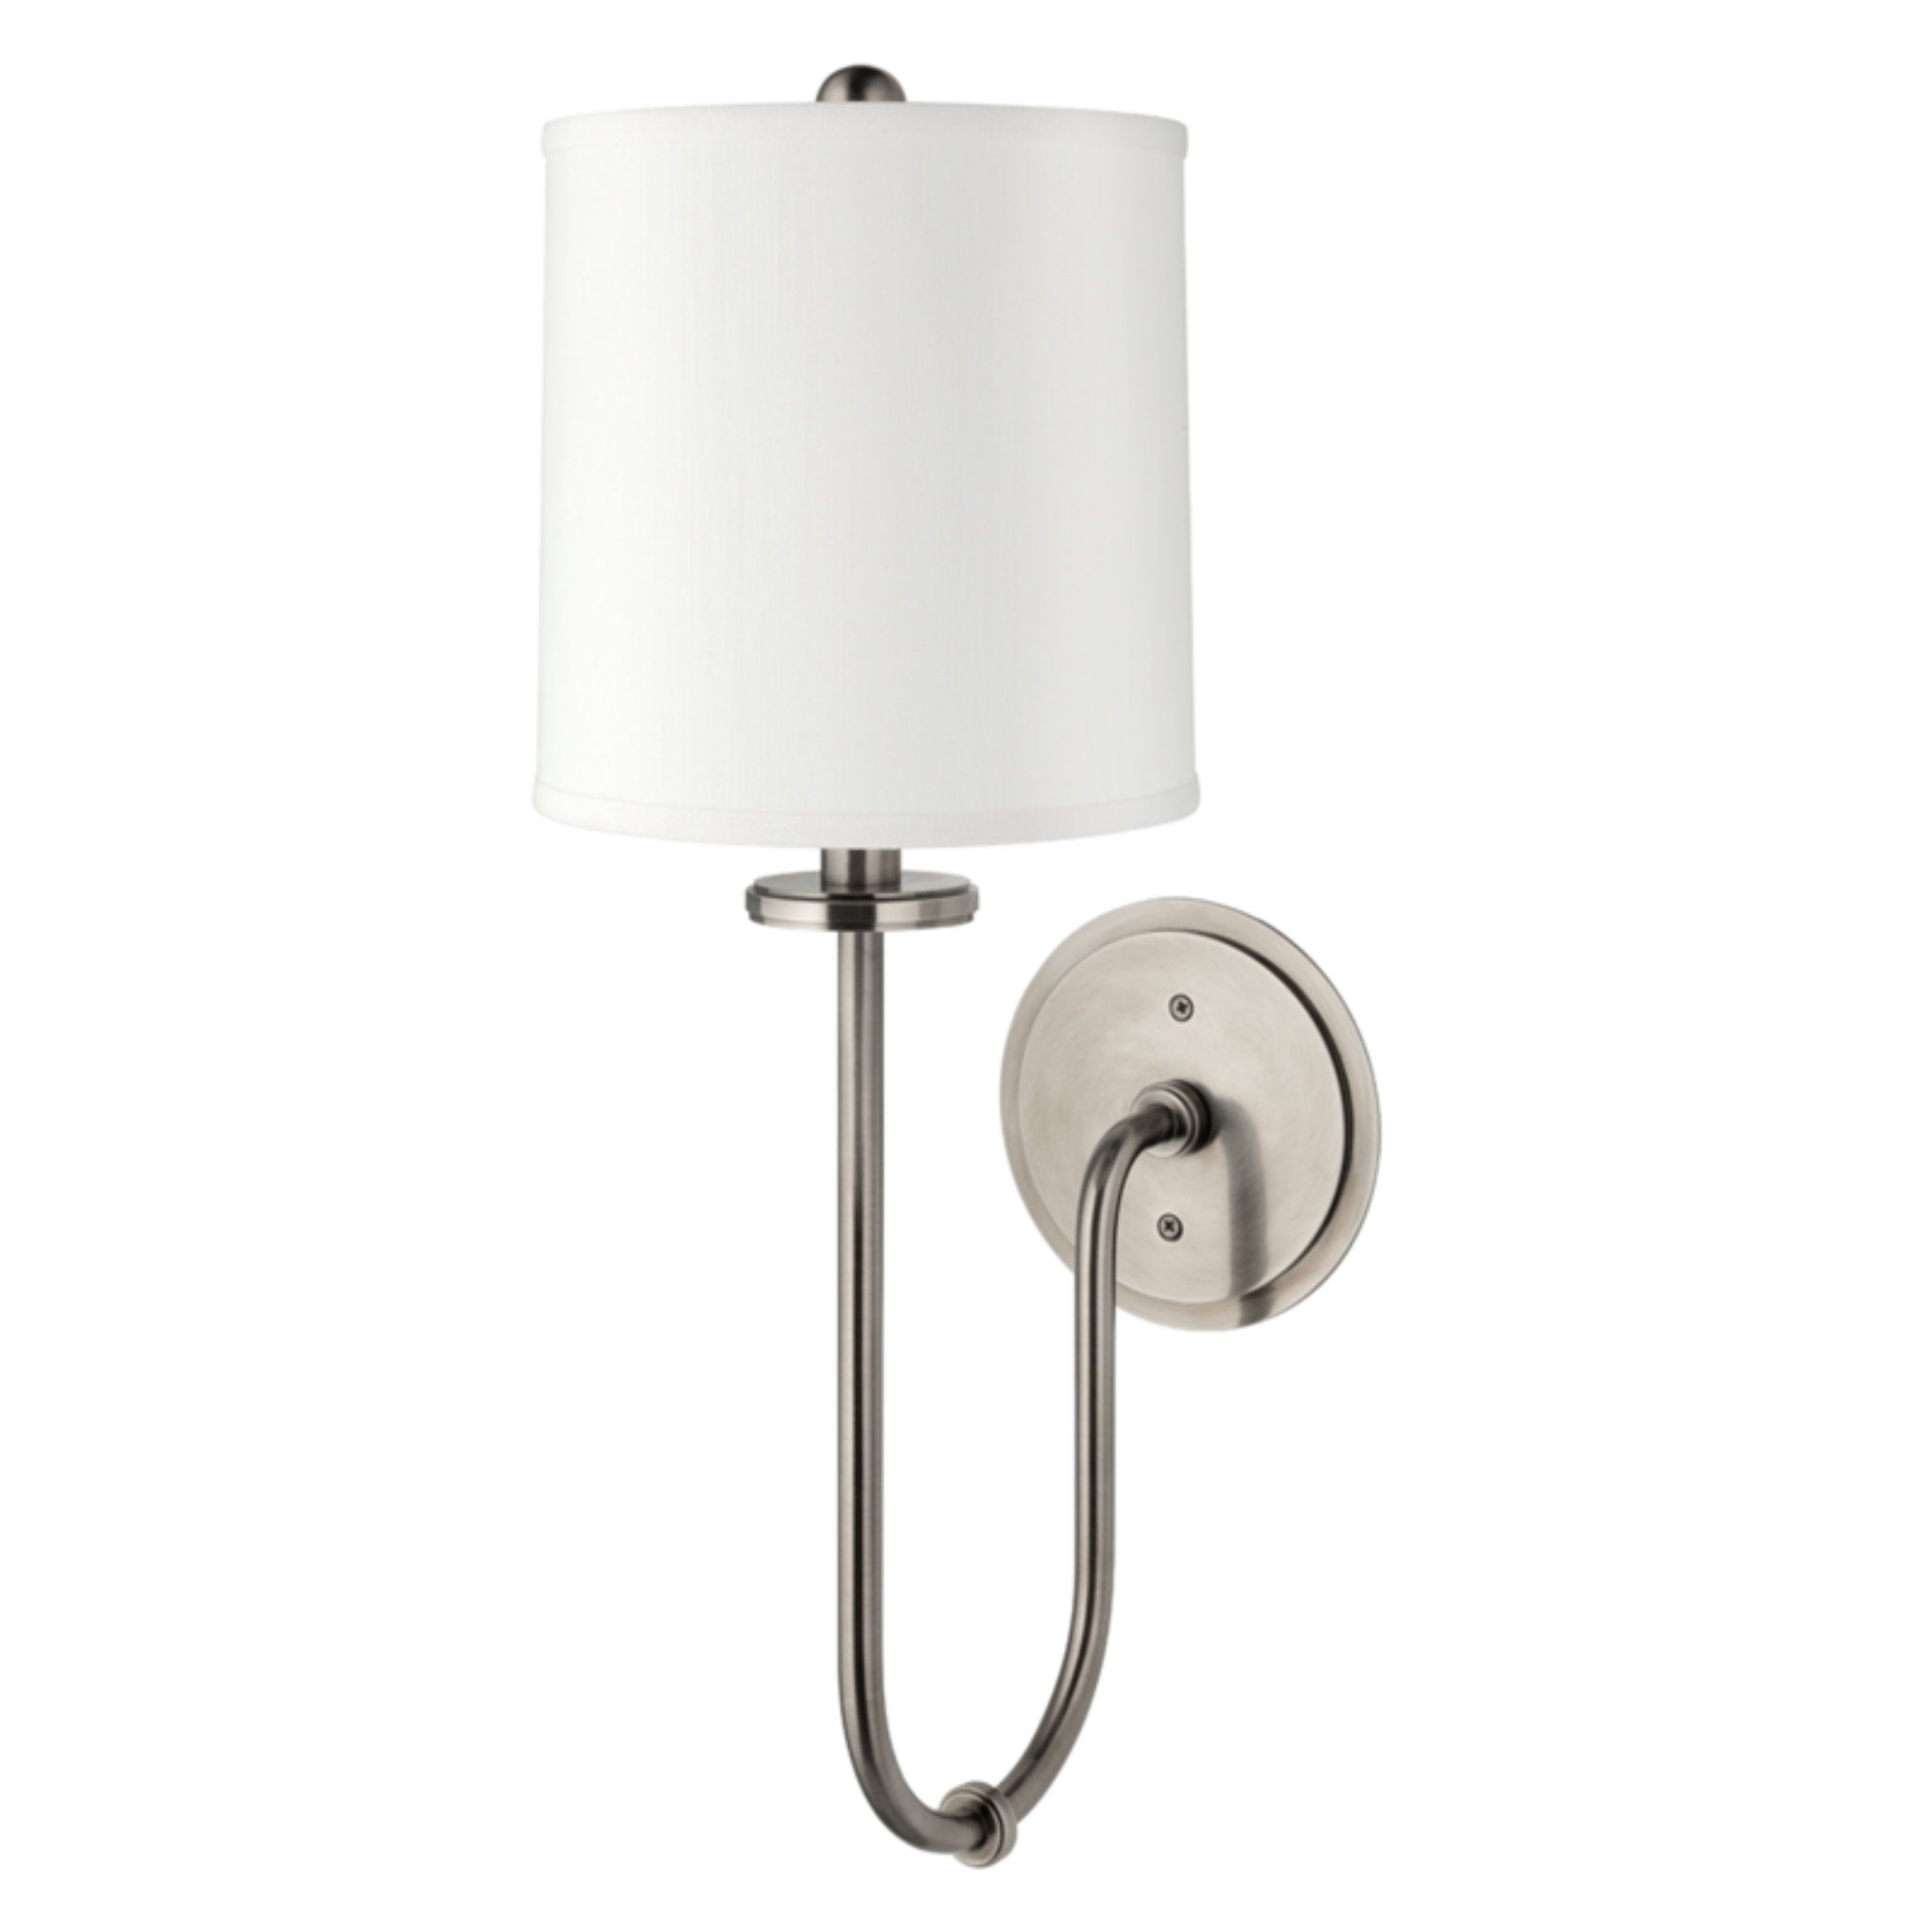 Jericho 1 Light Wall Sconce in Historic Nickel